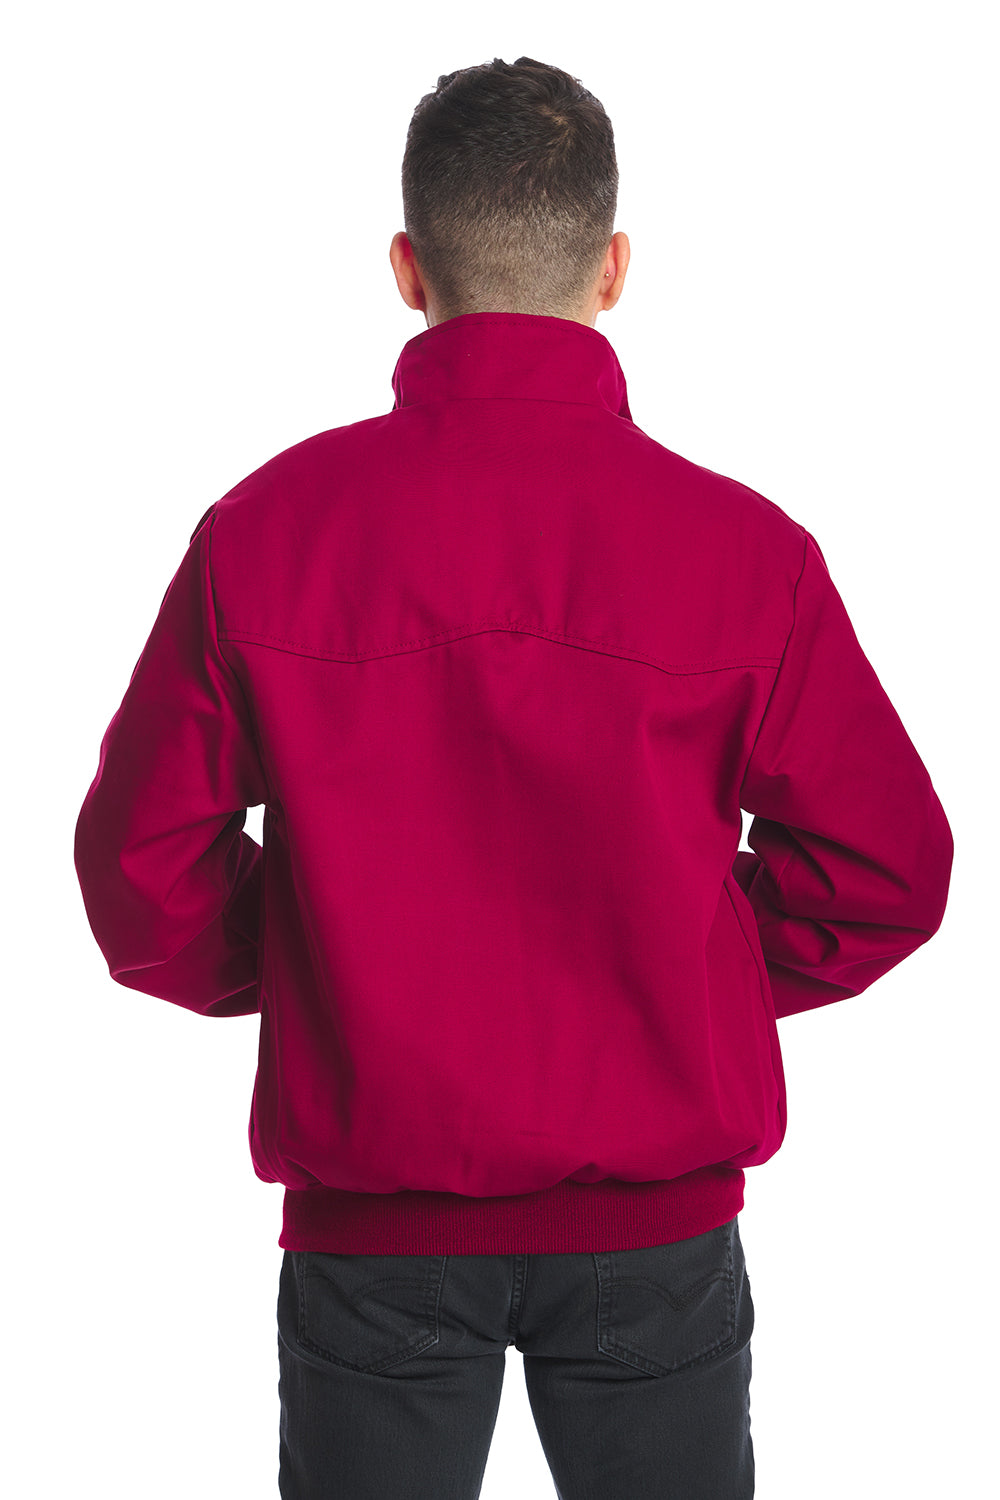 Male model in red bomber jacket